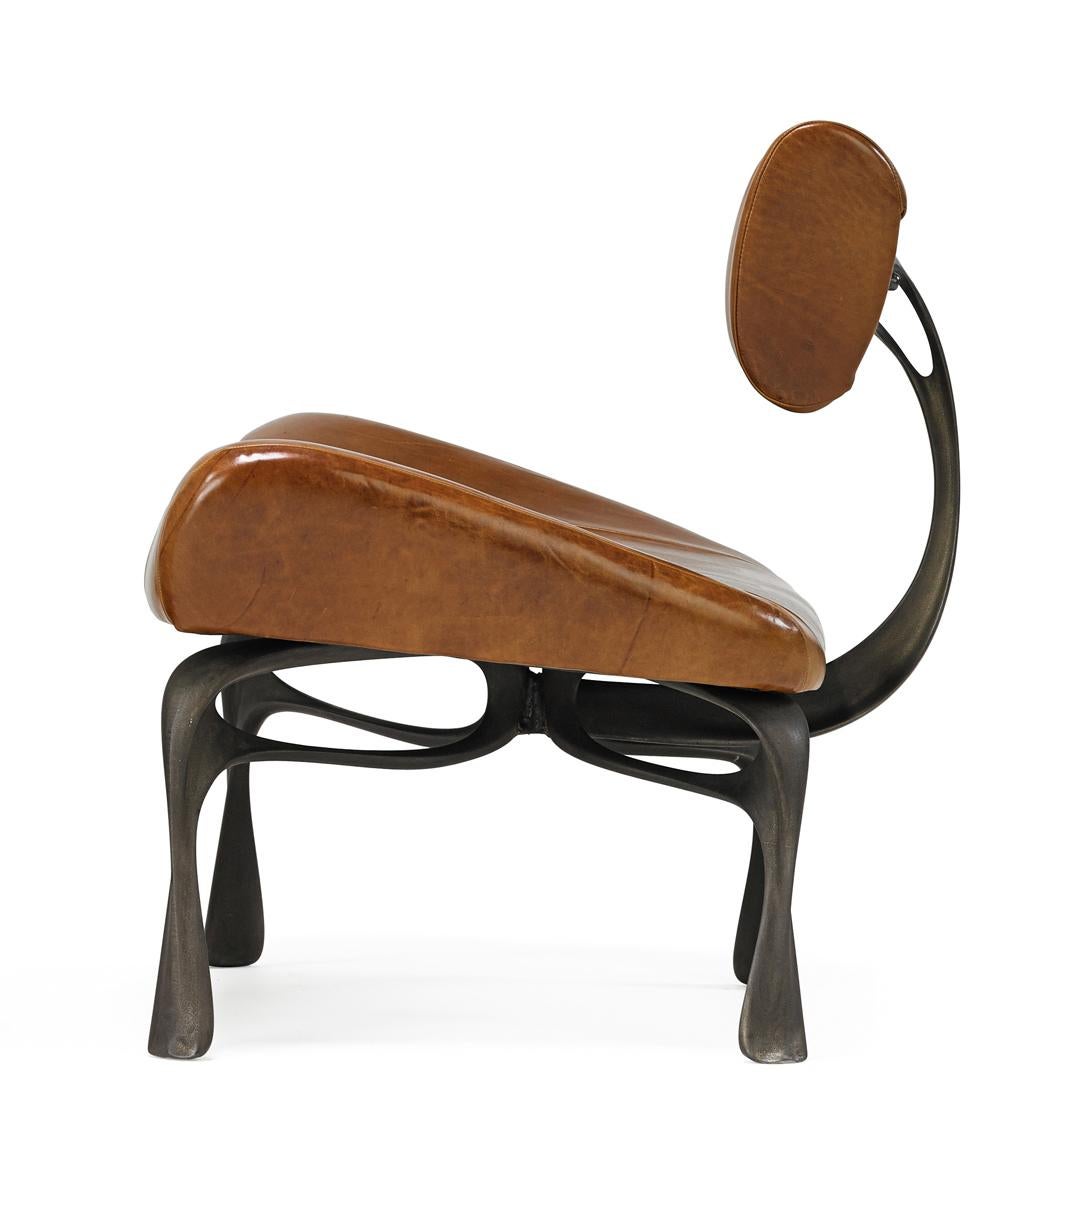 Jordan Mozer, Victory Lounge Chair, Leather and Cast, Recycled Magnesium-Aluminum Alloy with Hand Rubbed Patina, Made in Chicago, 2012/2016. A 2015 variation on the lounge chairs created for Victory at the Meadowlands in 2012-13. It is about 31”